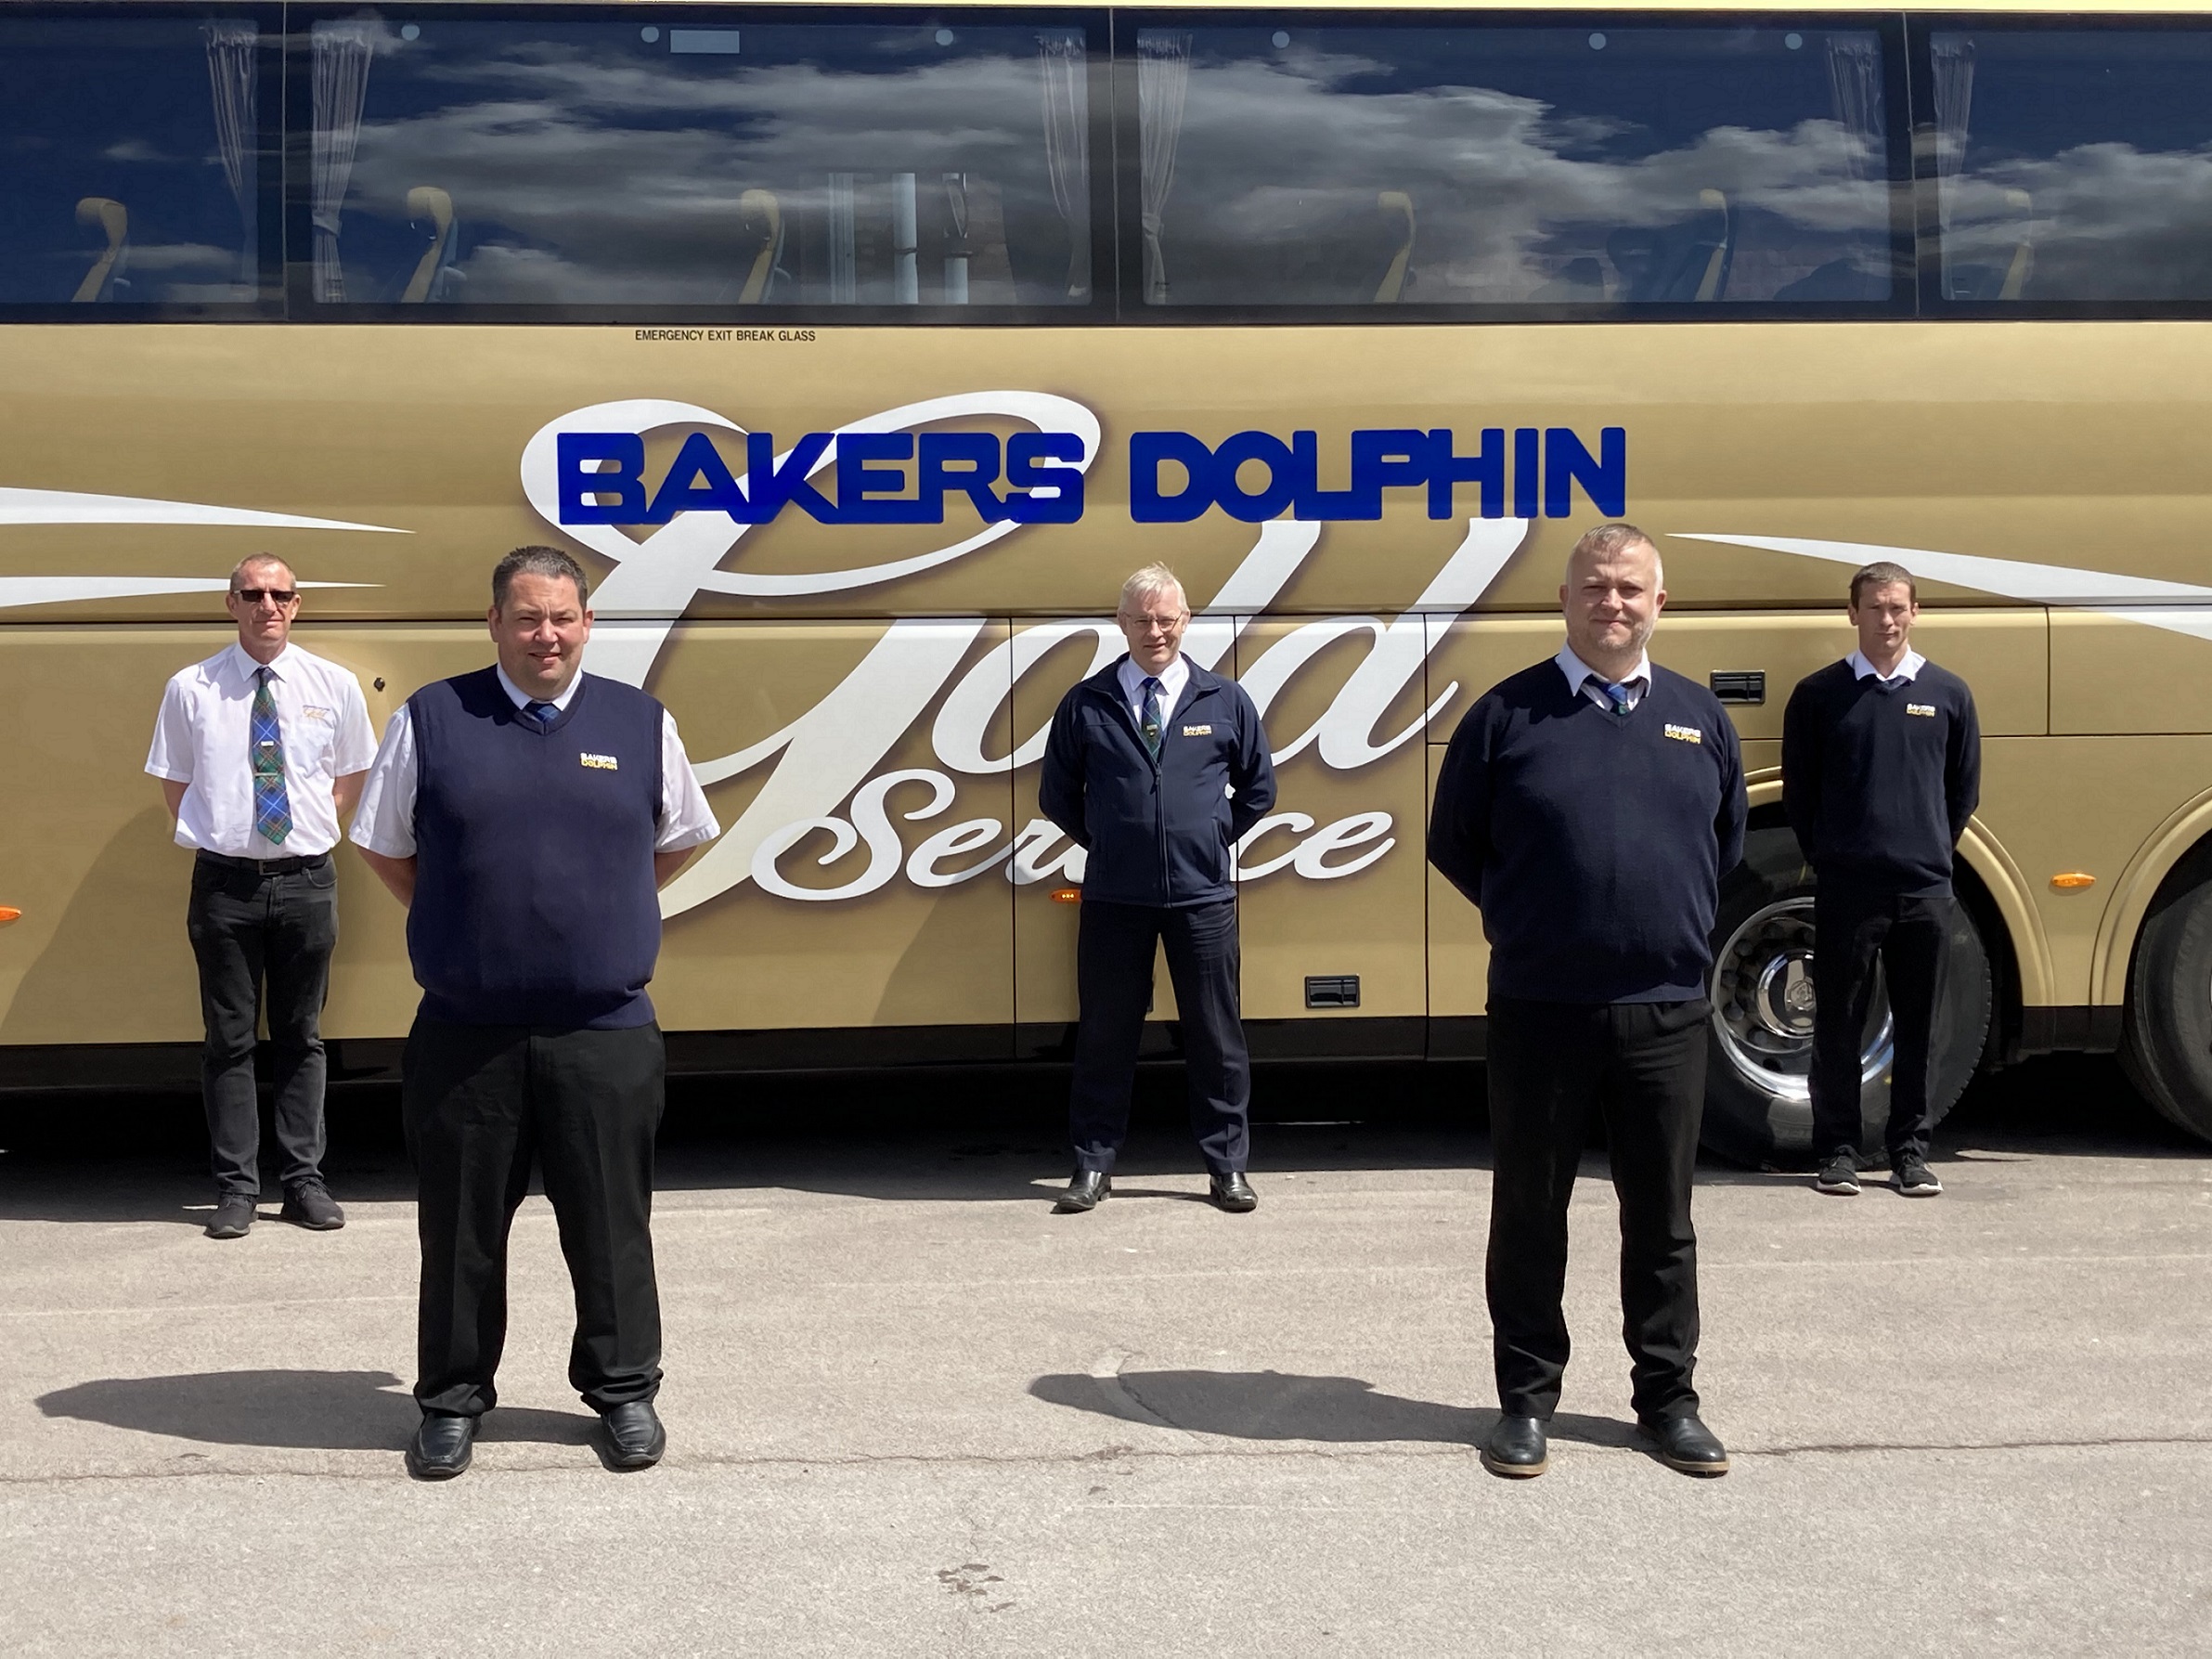 Bakers Dolphin drivers praised for ambulance work